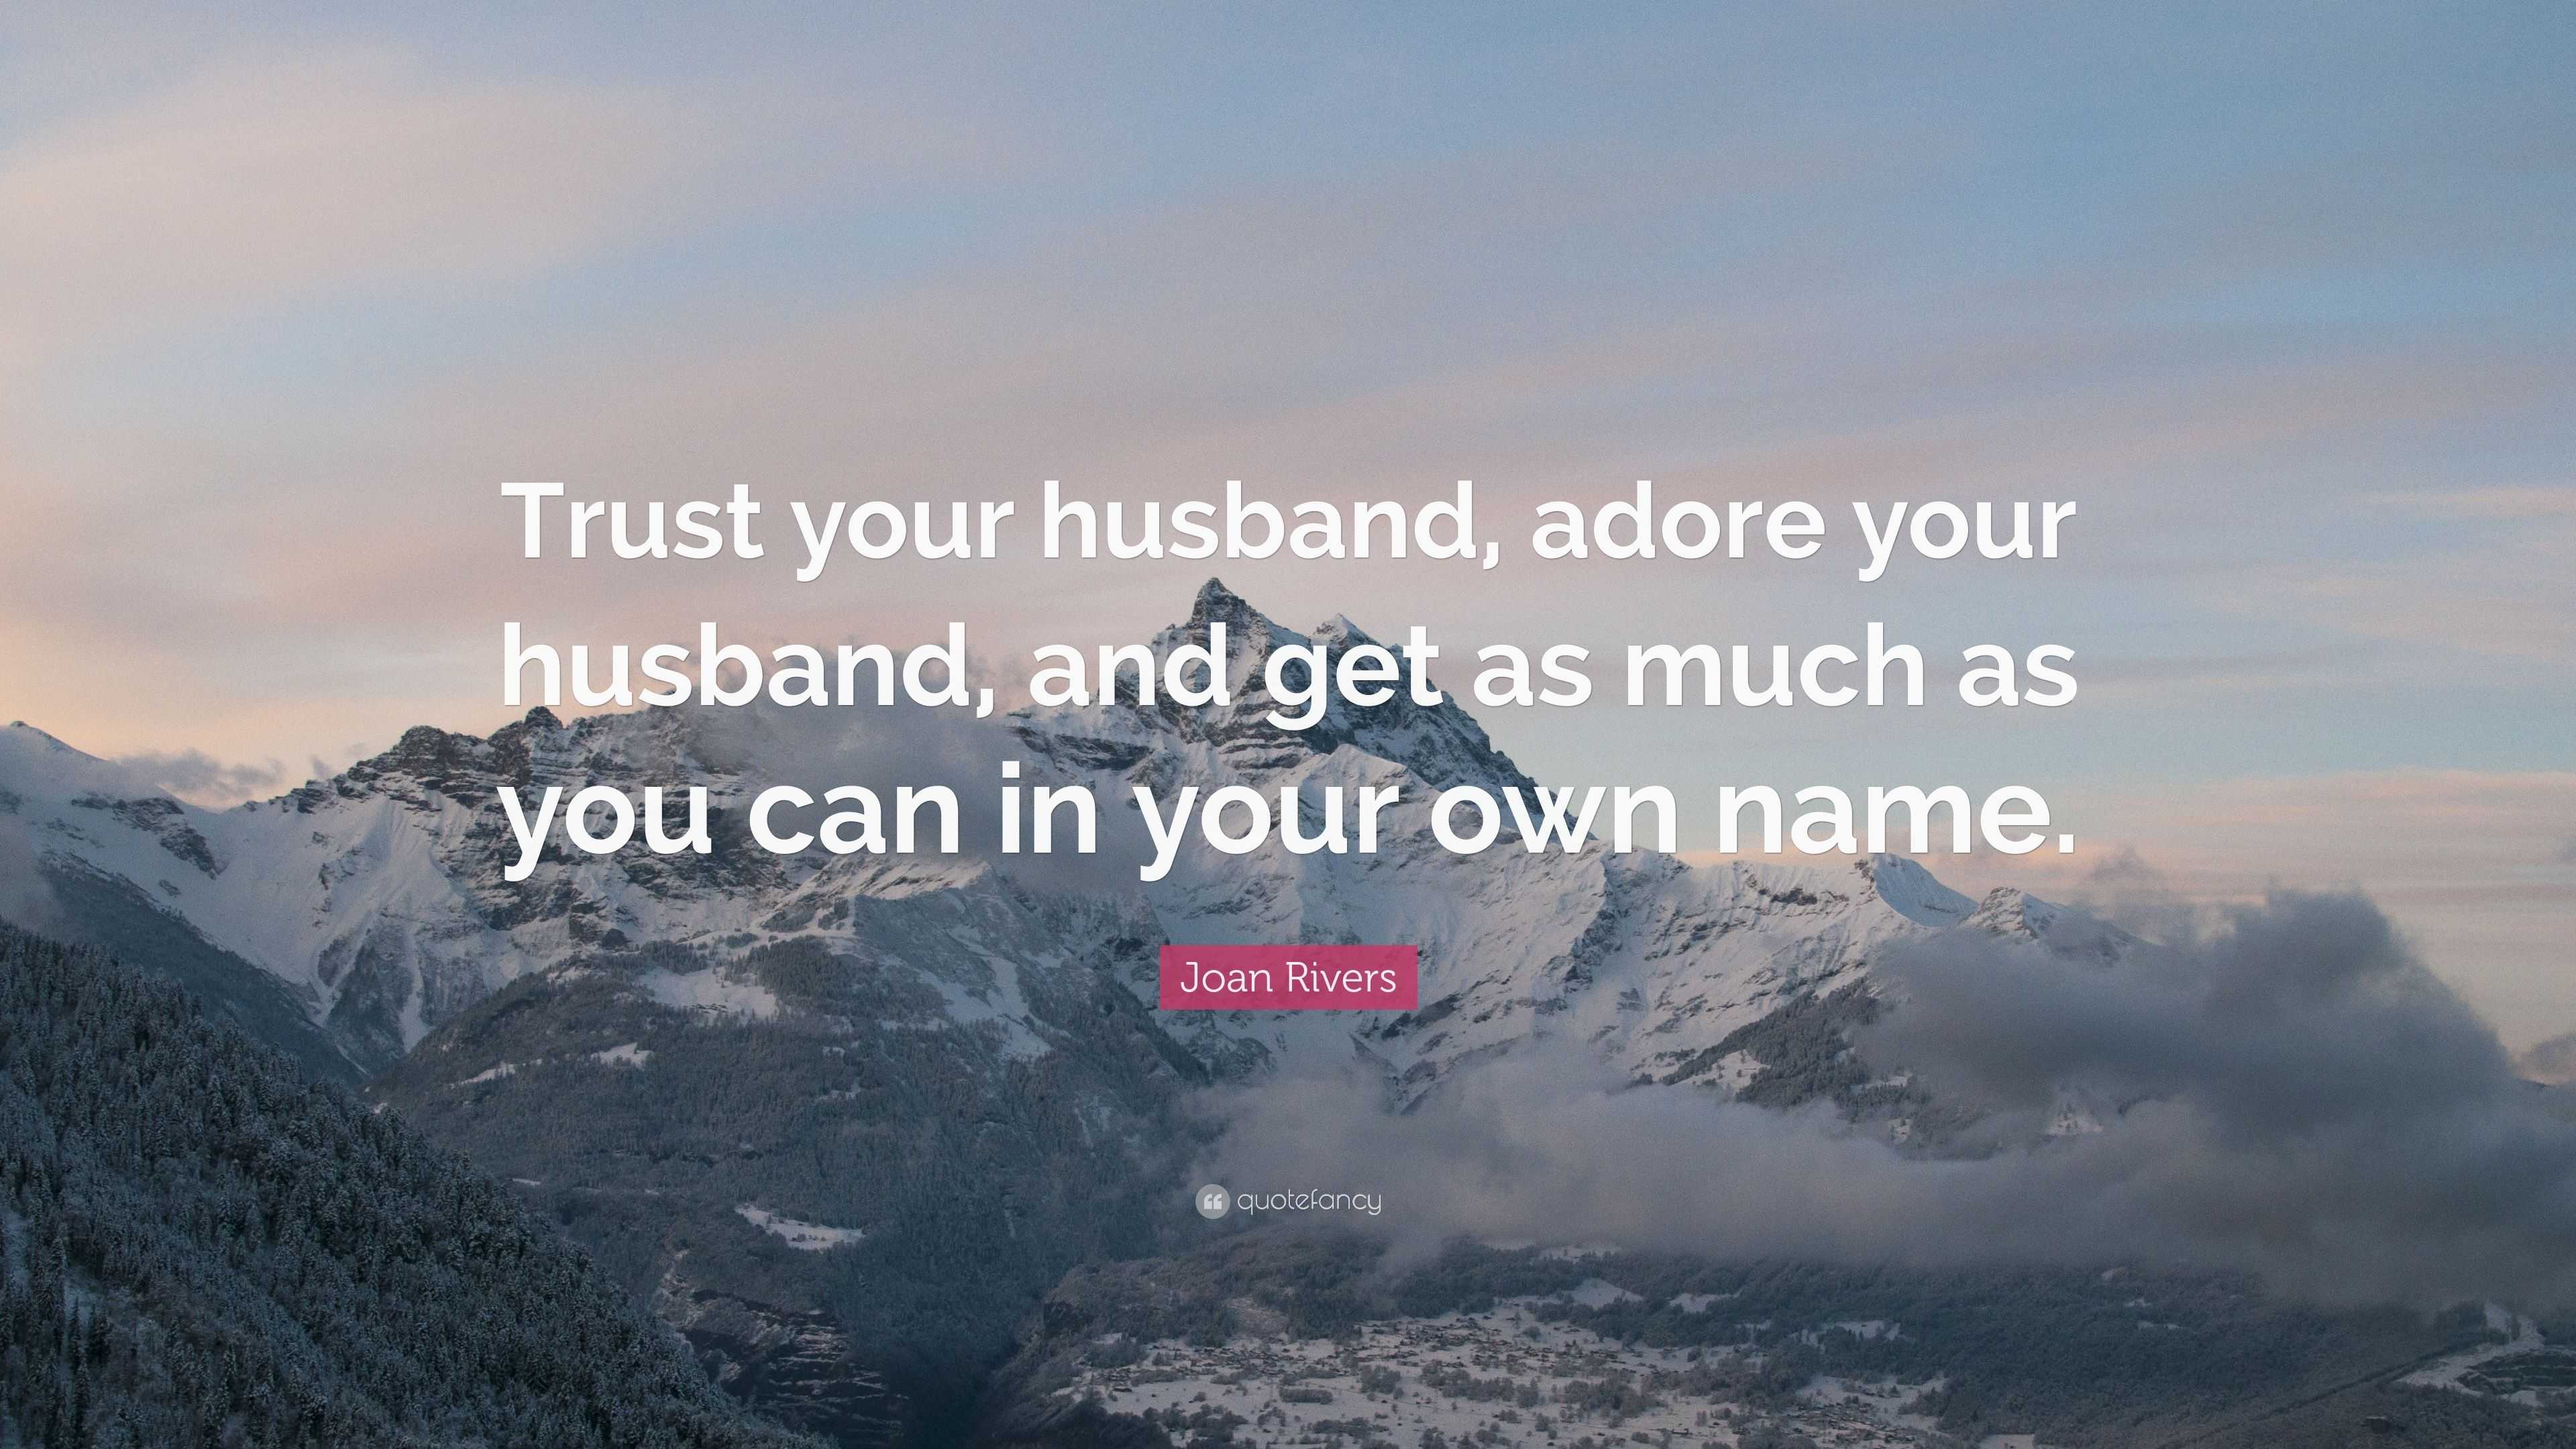 https://quotefancy.com/media/wallpaper/3840x2160/3754817-Joan-Rivers-Quote-Trust-your-husband-adore-your-husband-and-get-as.jpg